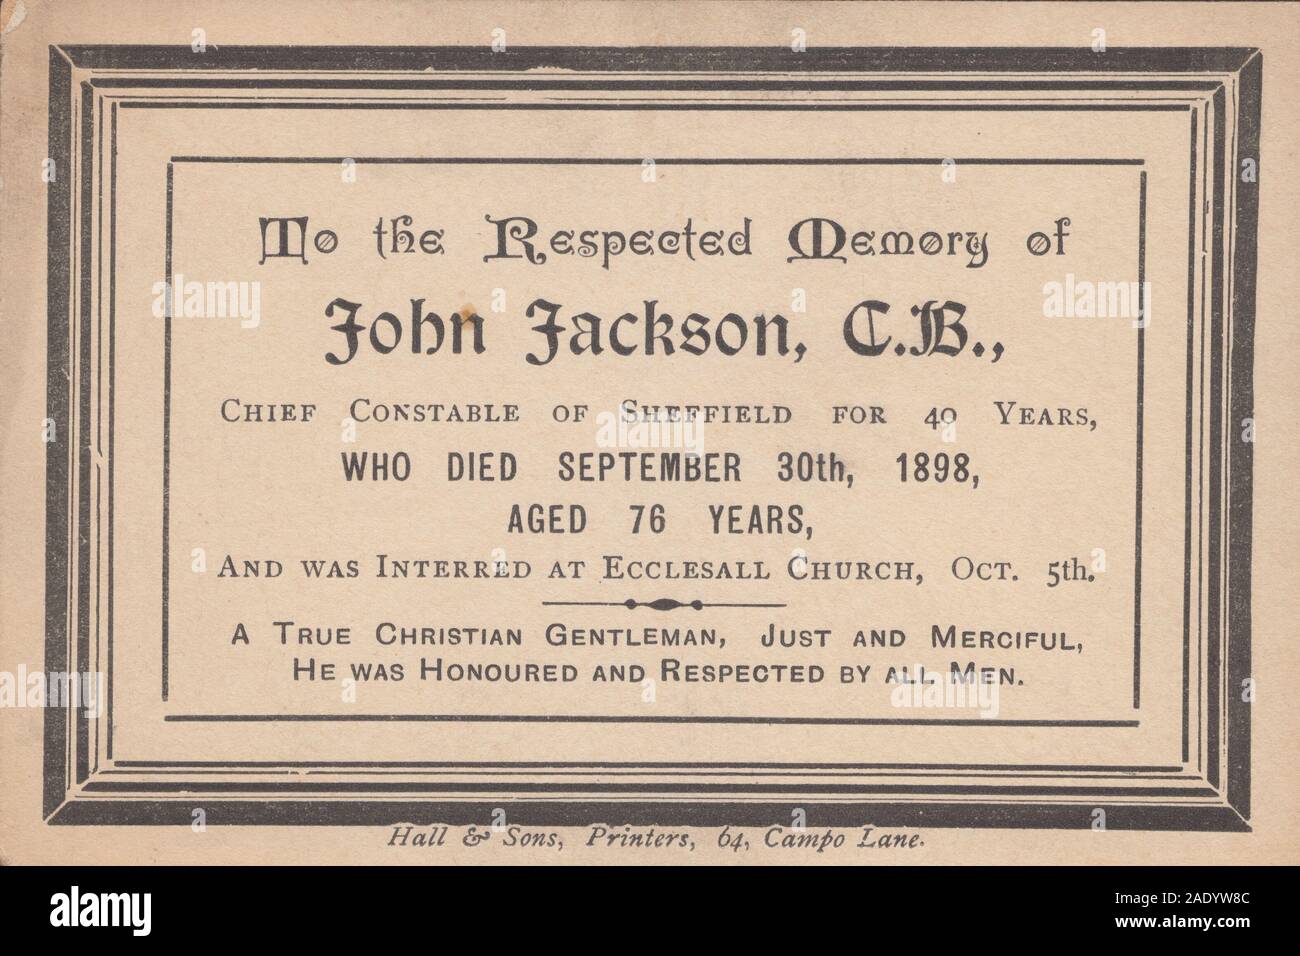 In Memoriam Card For John Jackson, C.B. The Chief Constable of Sheffield For 40 Years. Died September 30th 1898 Aged 76 Years and Was Interred at Ecclesall Church, Oct 5th. Stock Photo